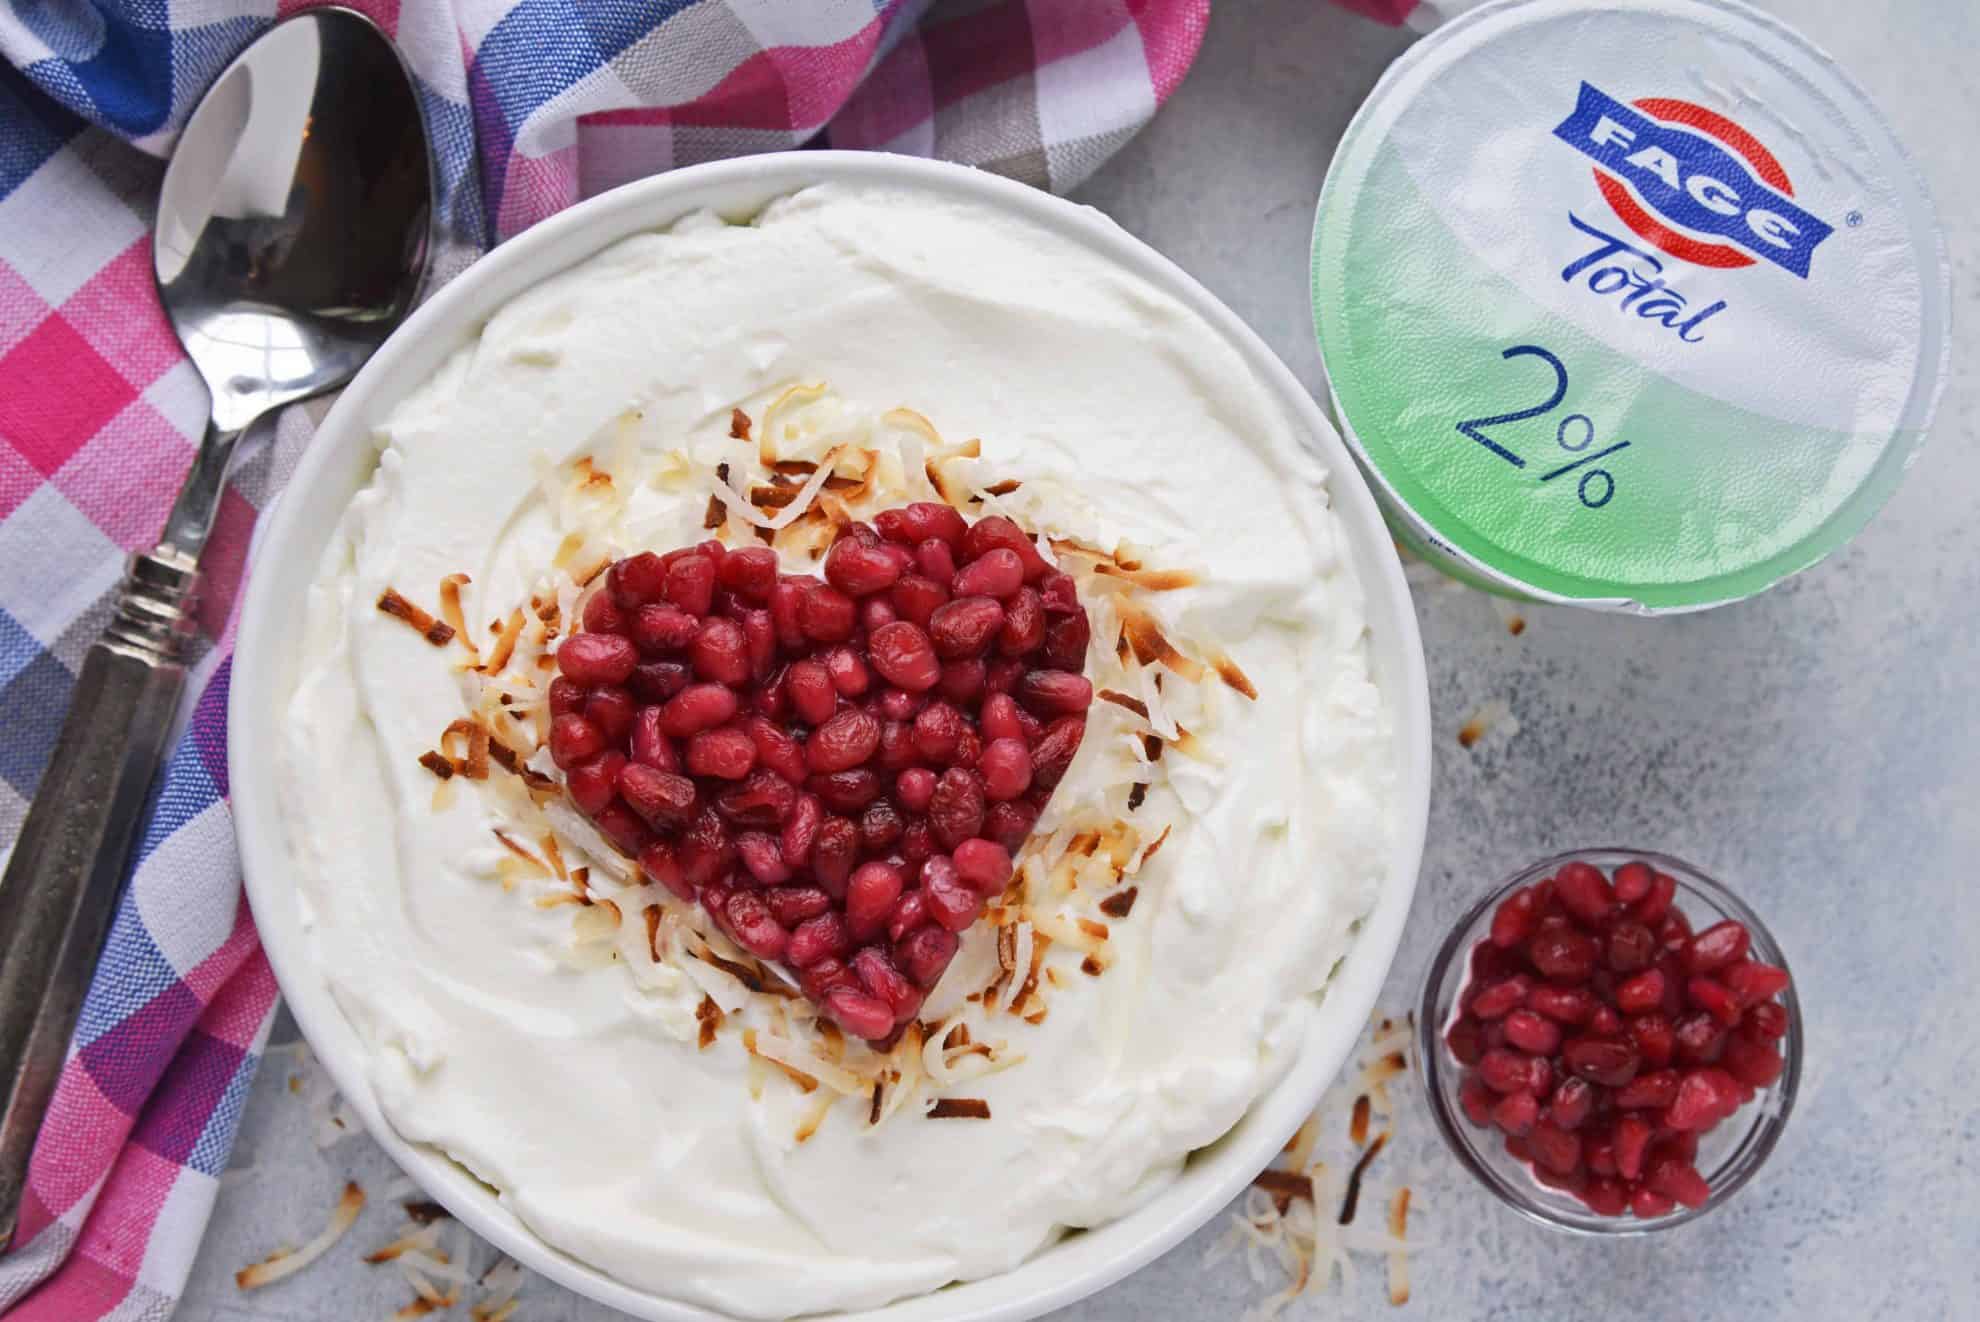 Discover your perfect Yogurt Match, FAGE Total is perfect for yogurt bowls, marinades, salad dressings, sour cream substitutes and even baking! AD #PlainExtraordinary #FAGE @FAGEUSA www.savoryexperiments.com 